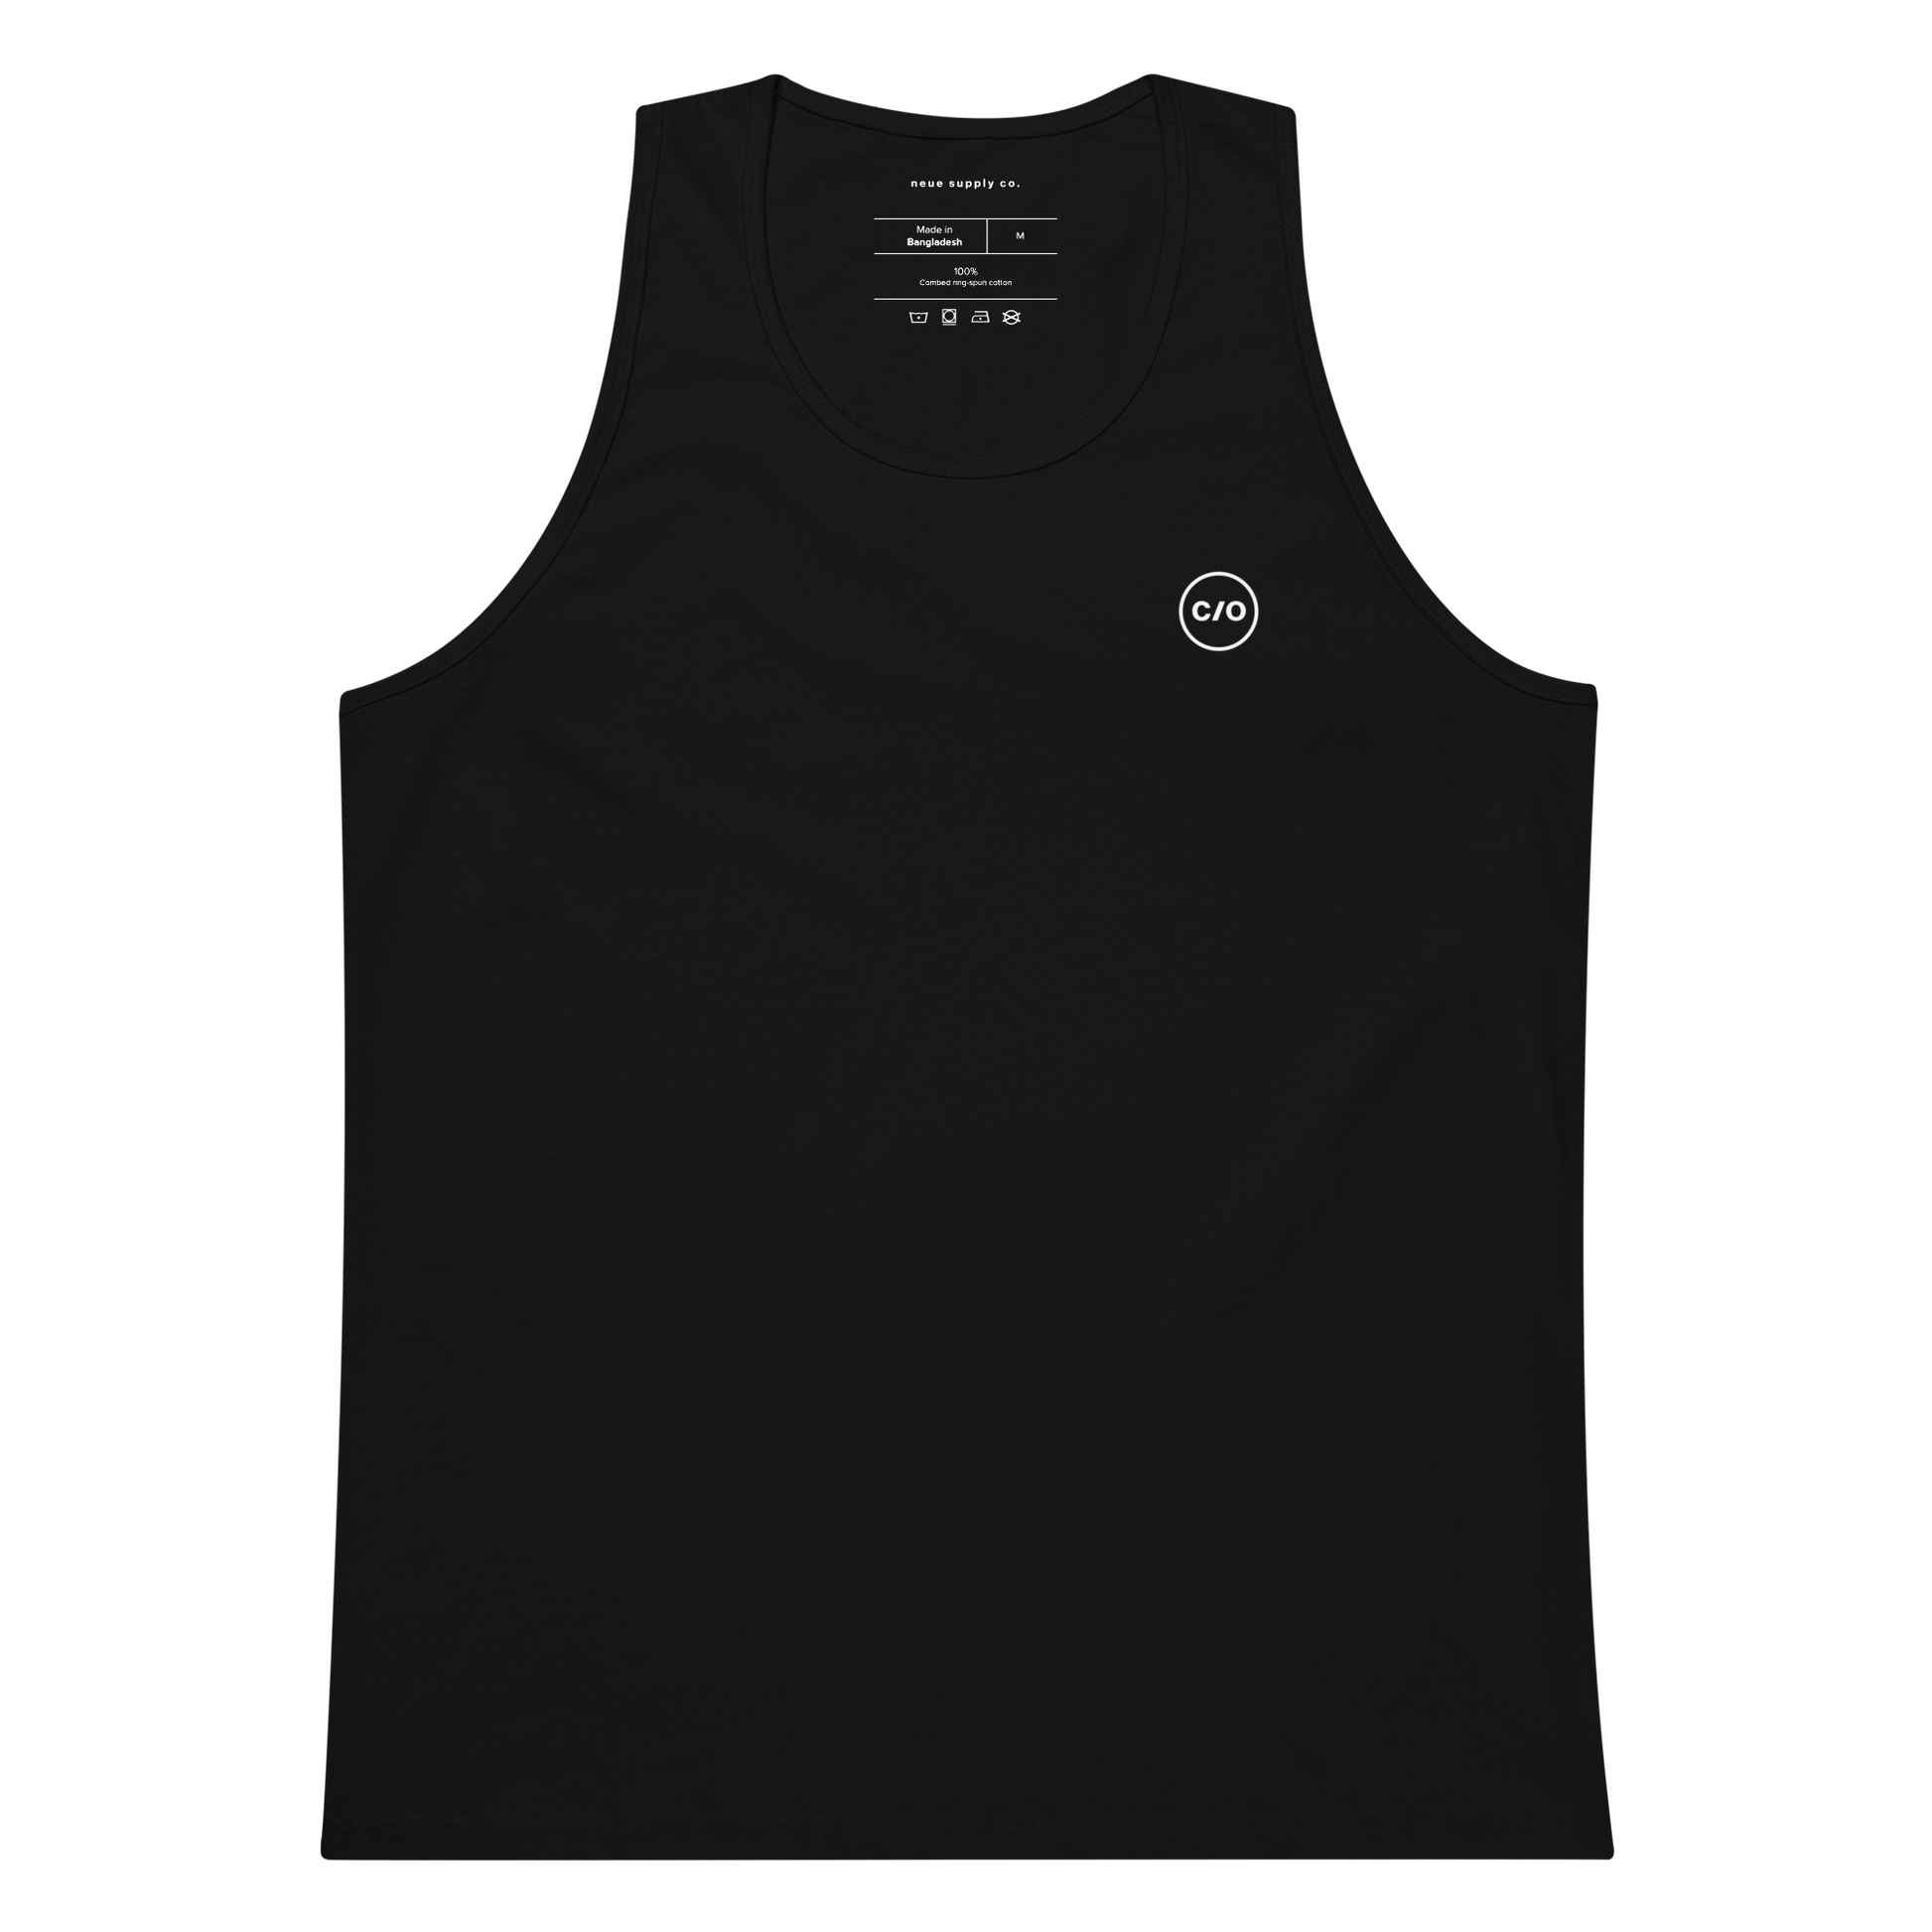 Neue Supply Co. Essential Workout Tank Top for Men in Black flat view